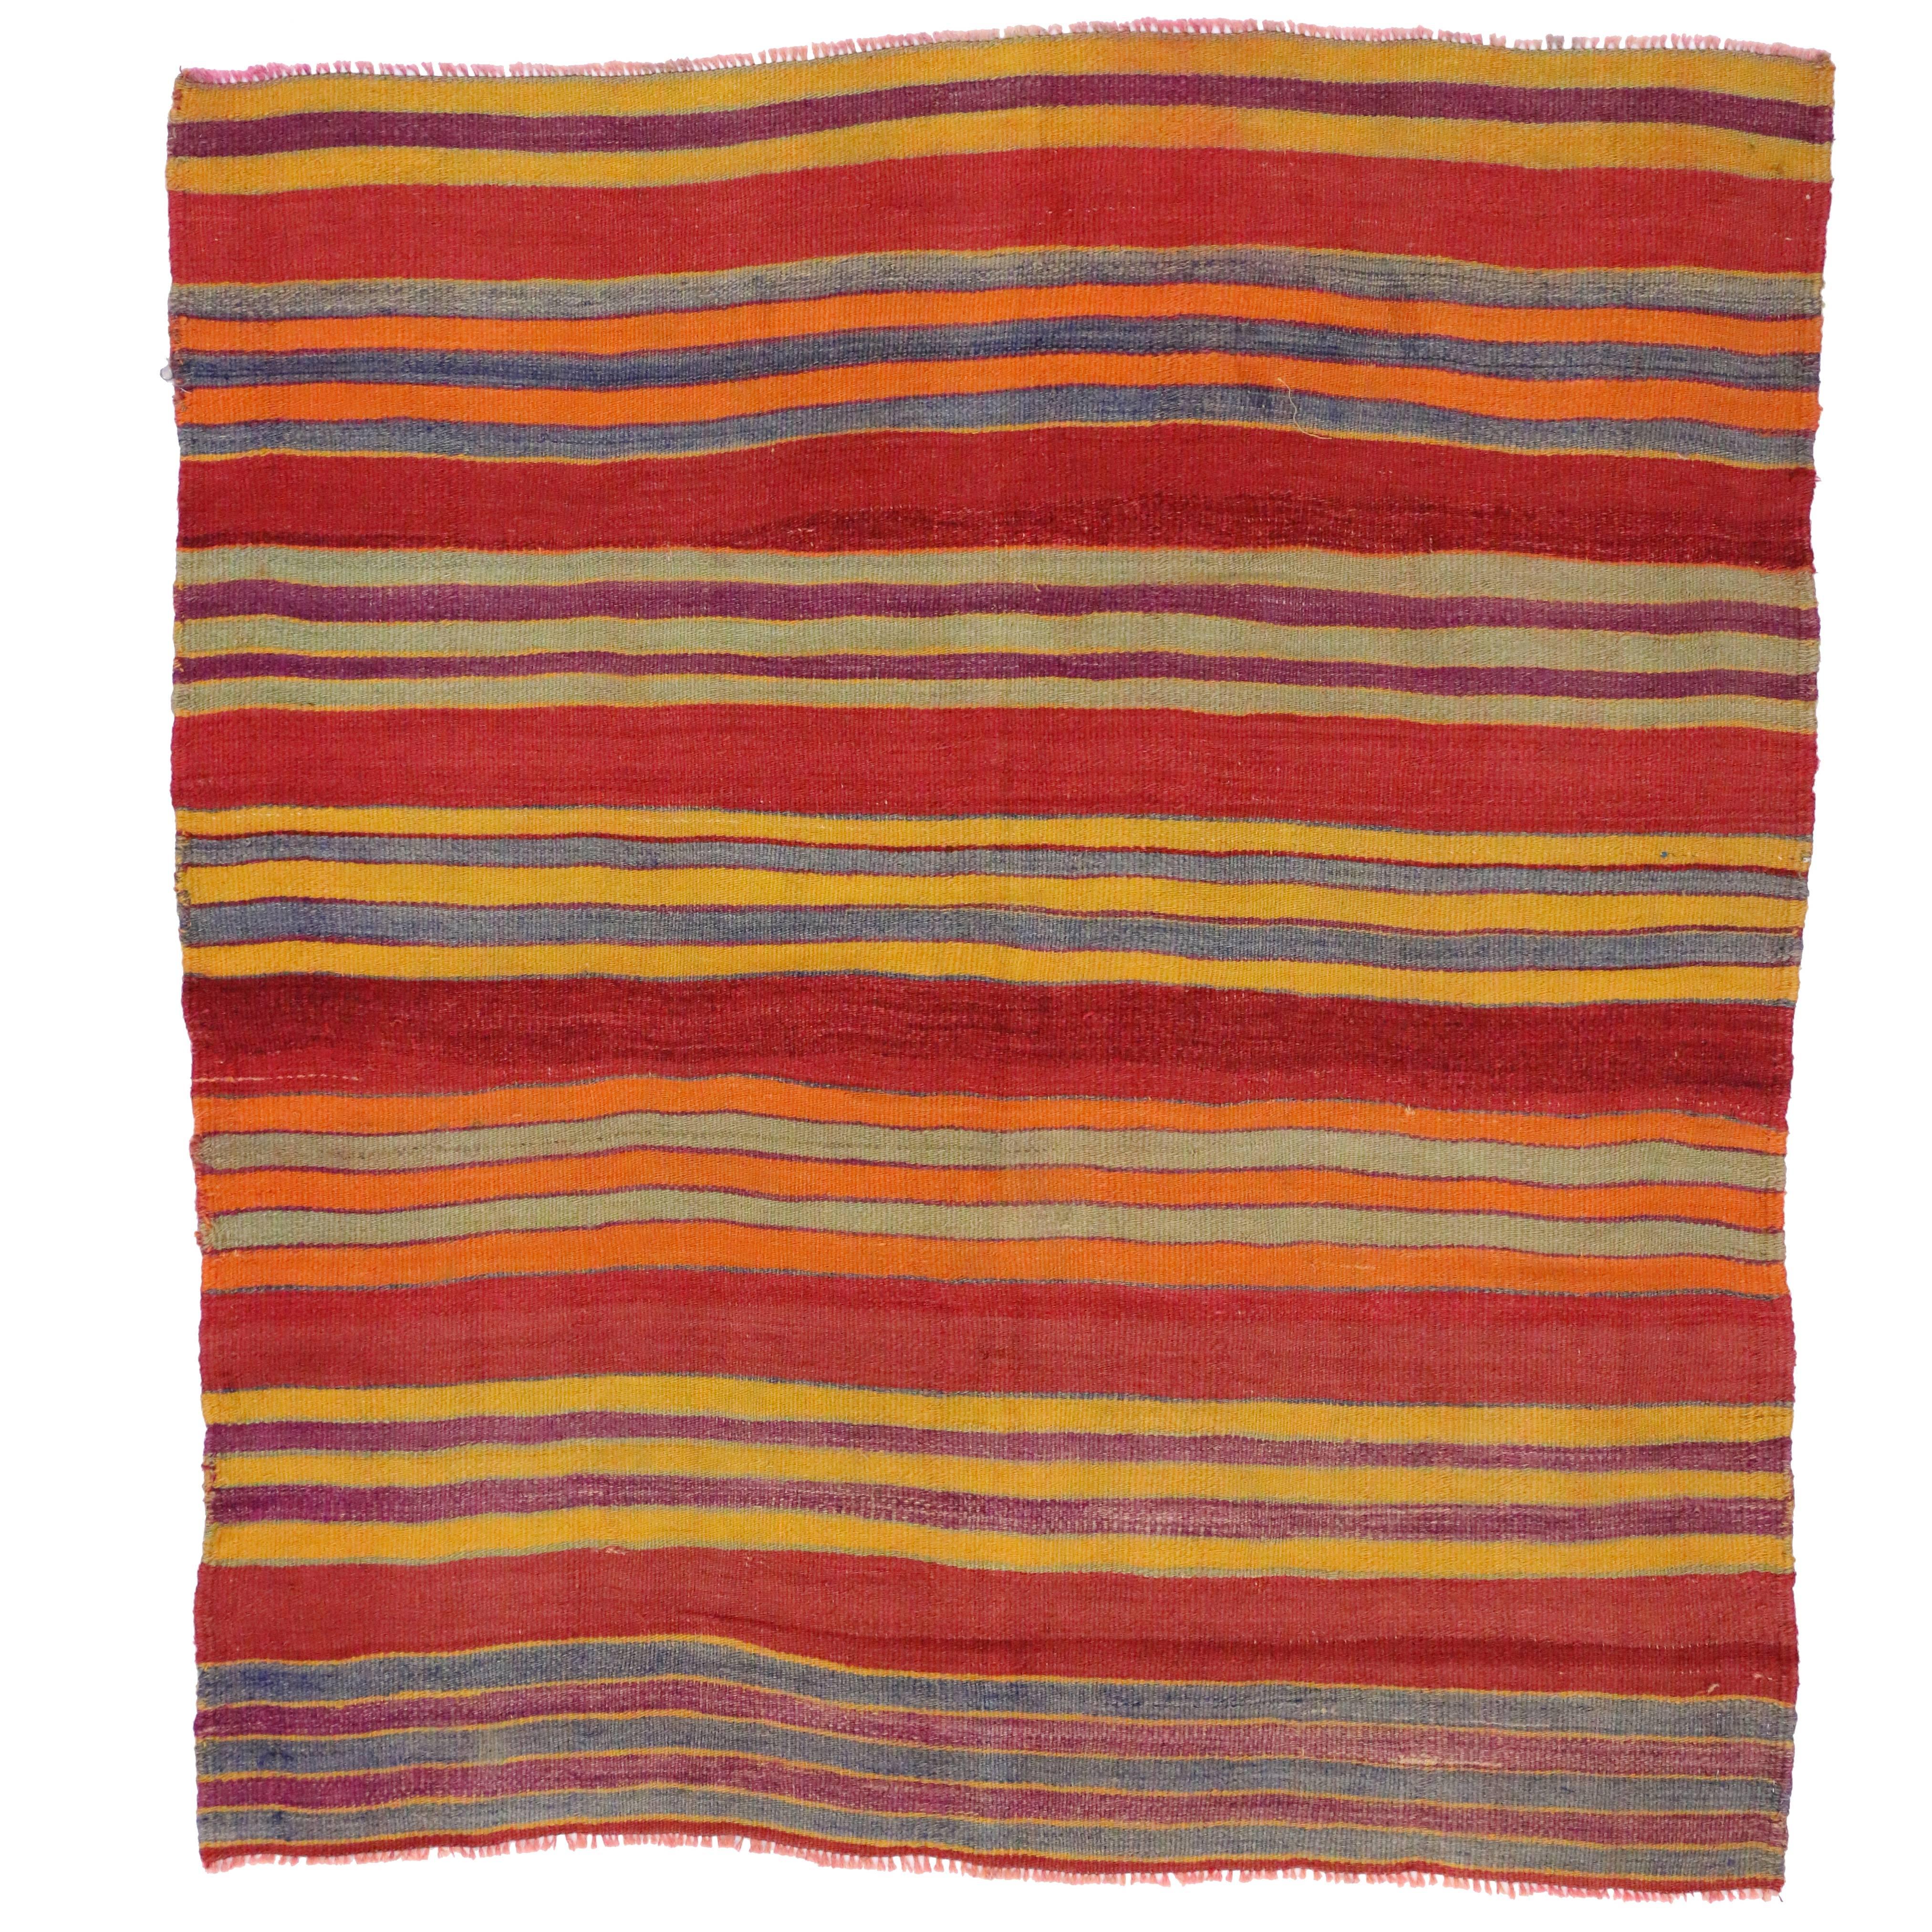 Vintage Turkish Kilim with Multi-Color Stripes in Modern Style, Red FlatWeave